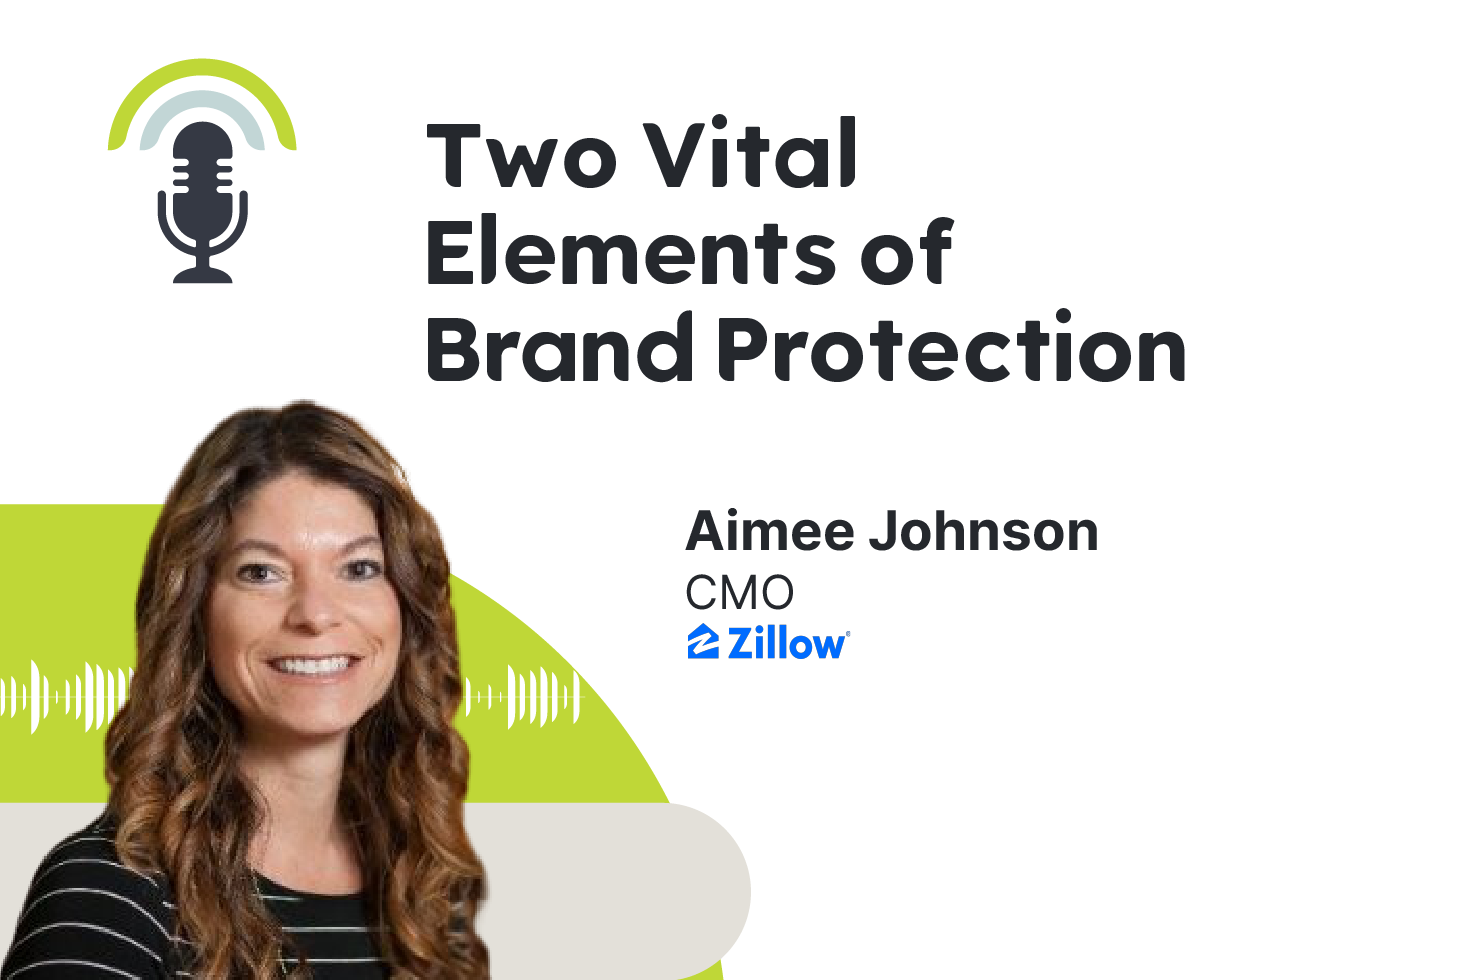 Two Vital Elements of Brand Protection